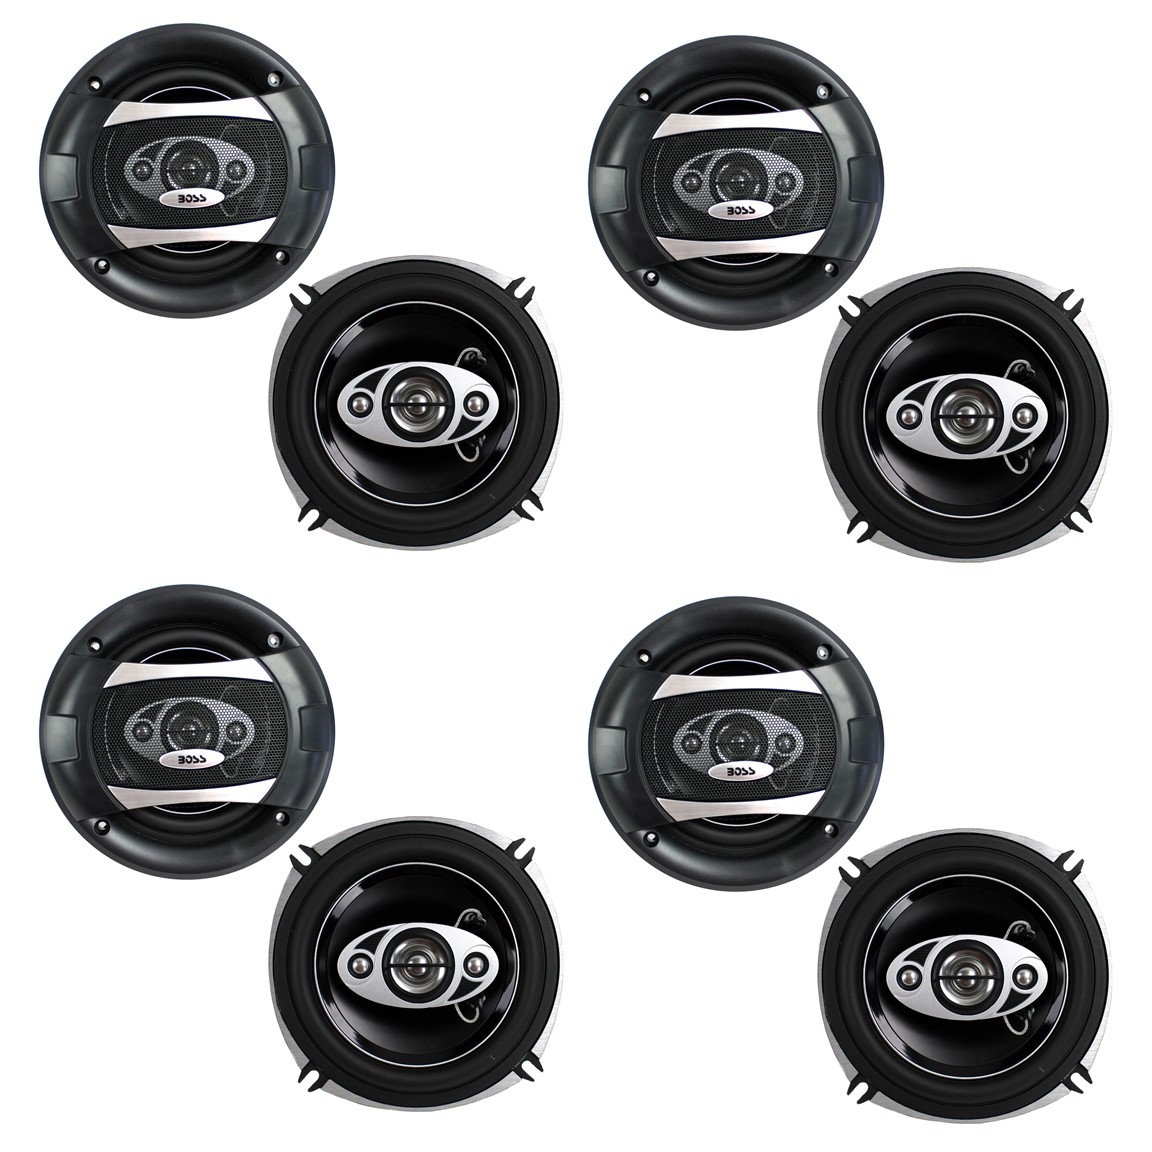 BOSS Audio P55.4C 5.25" 300W 4-Way Car Coaxial Audio Speakers Stereo (8 Pack) - image 1 of 7